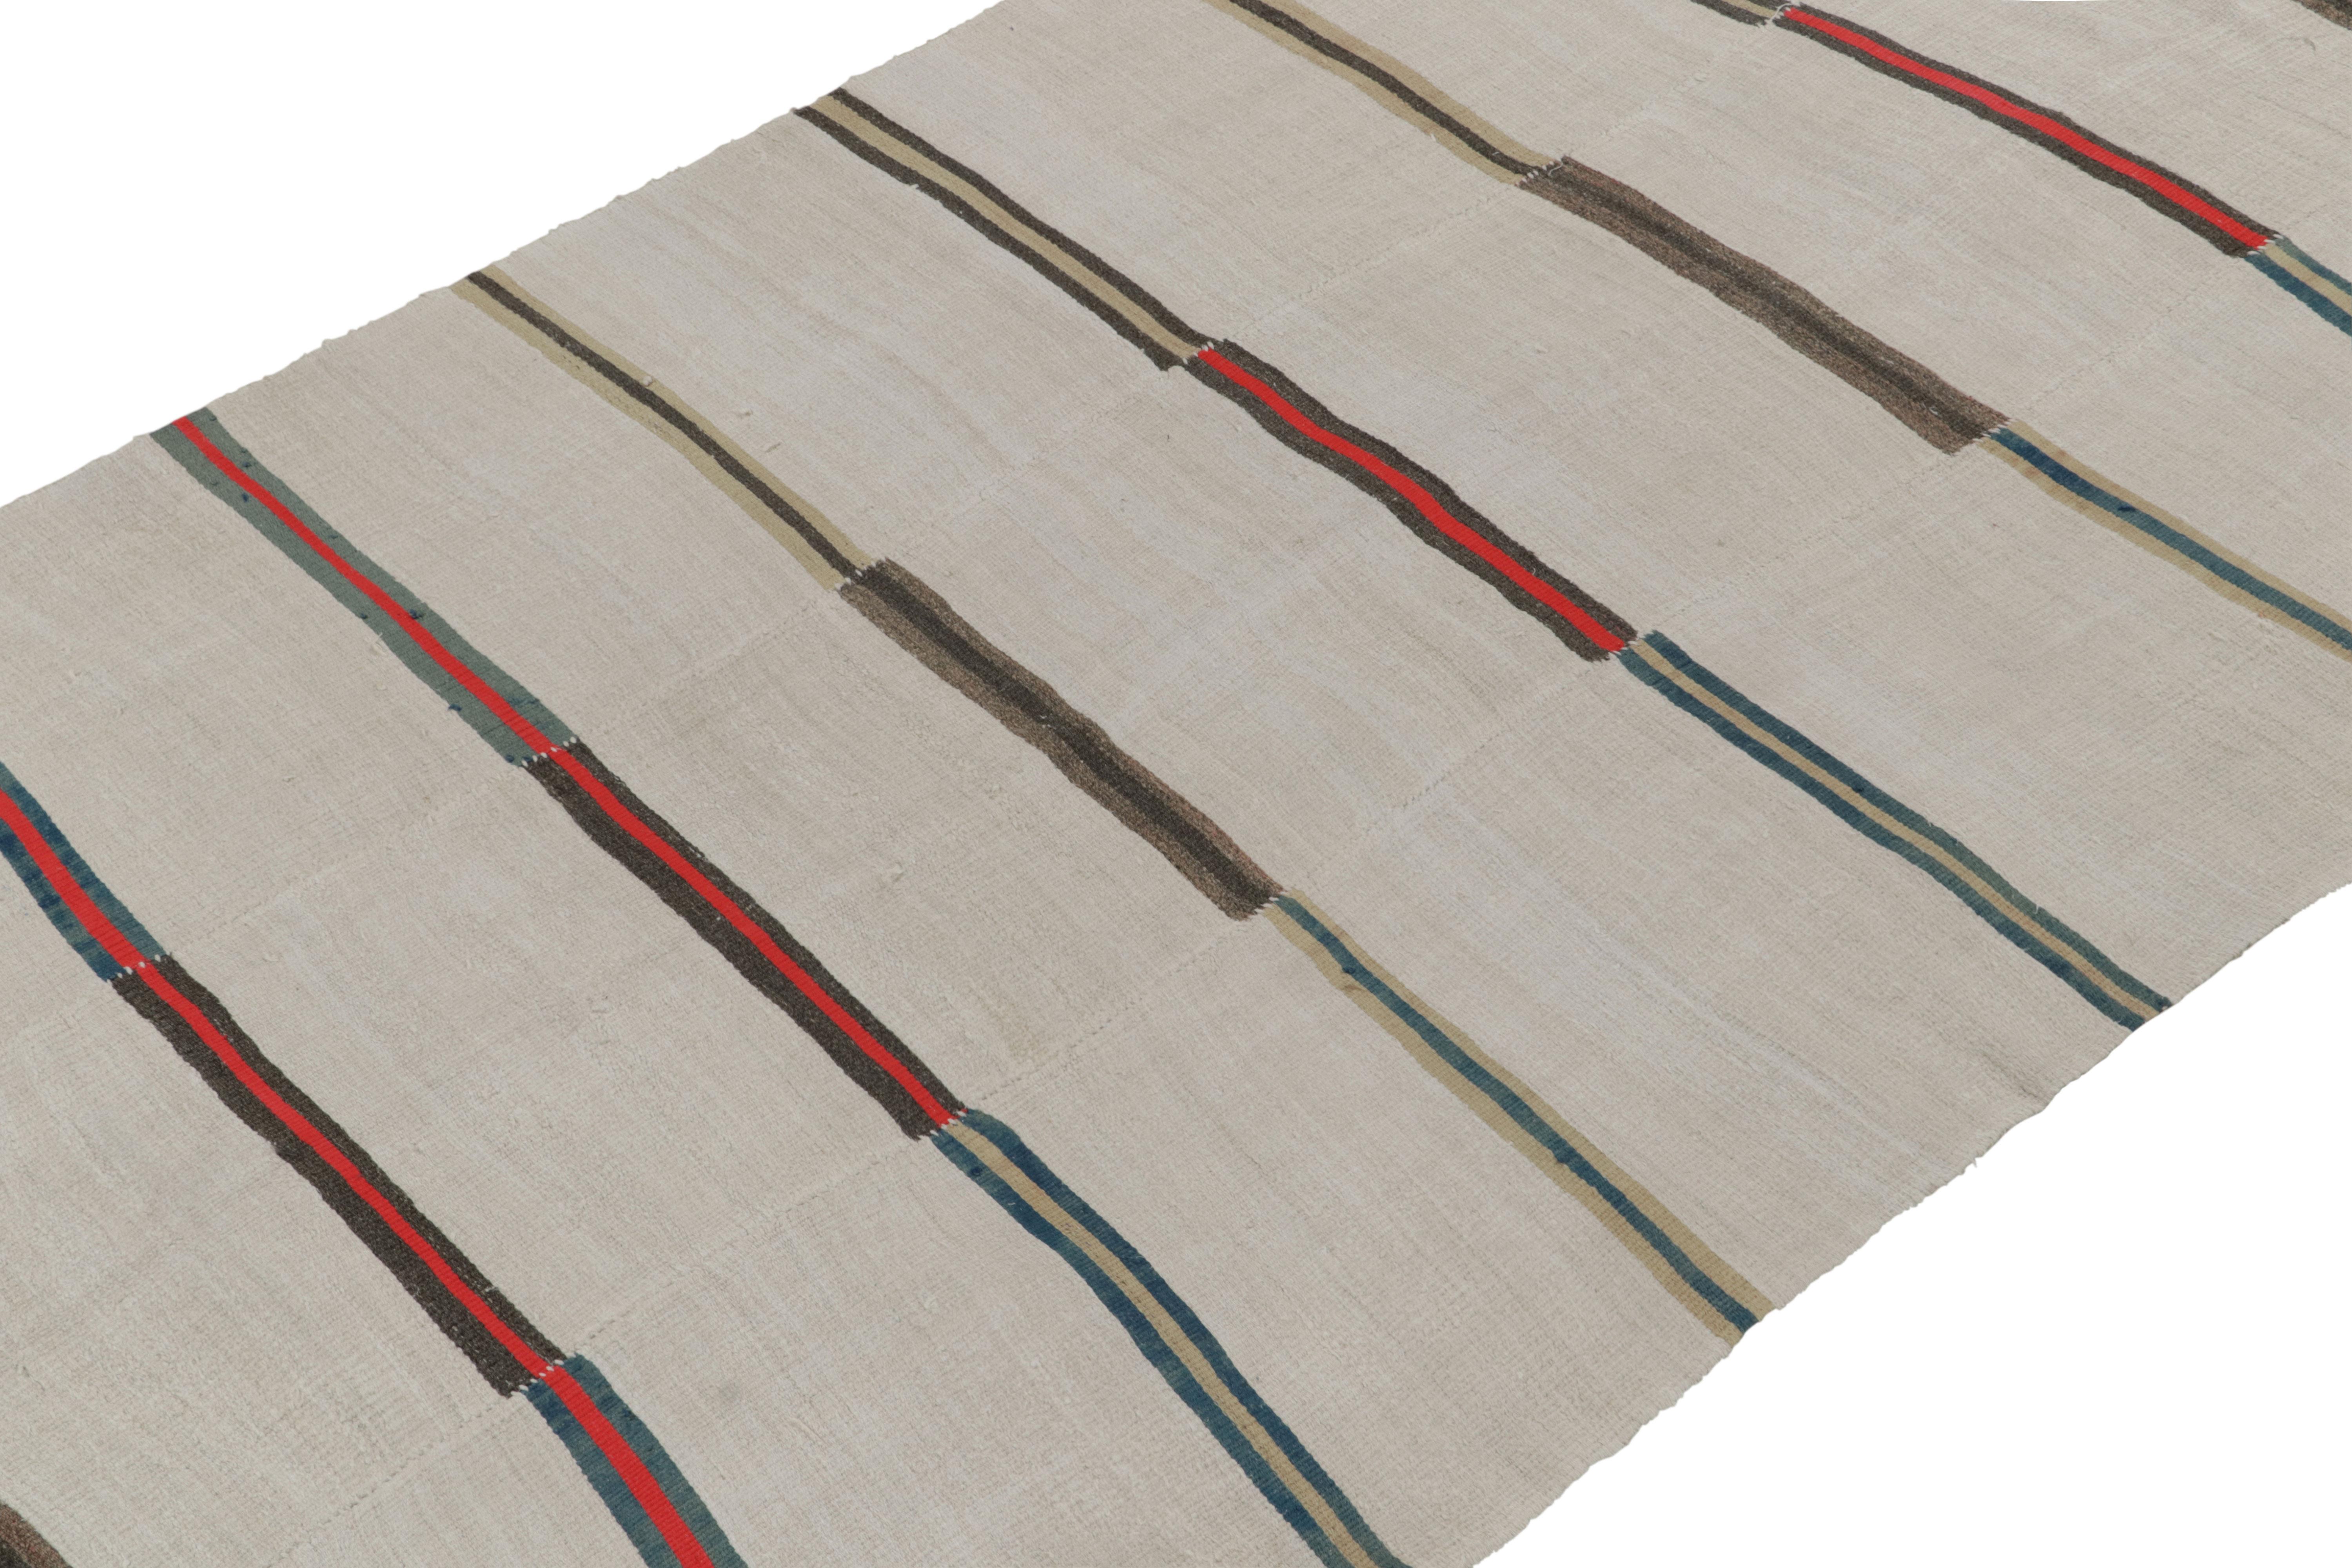 Tribal Vintage Kilim rug in Off-White, Red Stripe Patterns, Panel style by Rug & Kilim For Sale